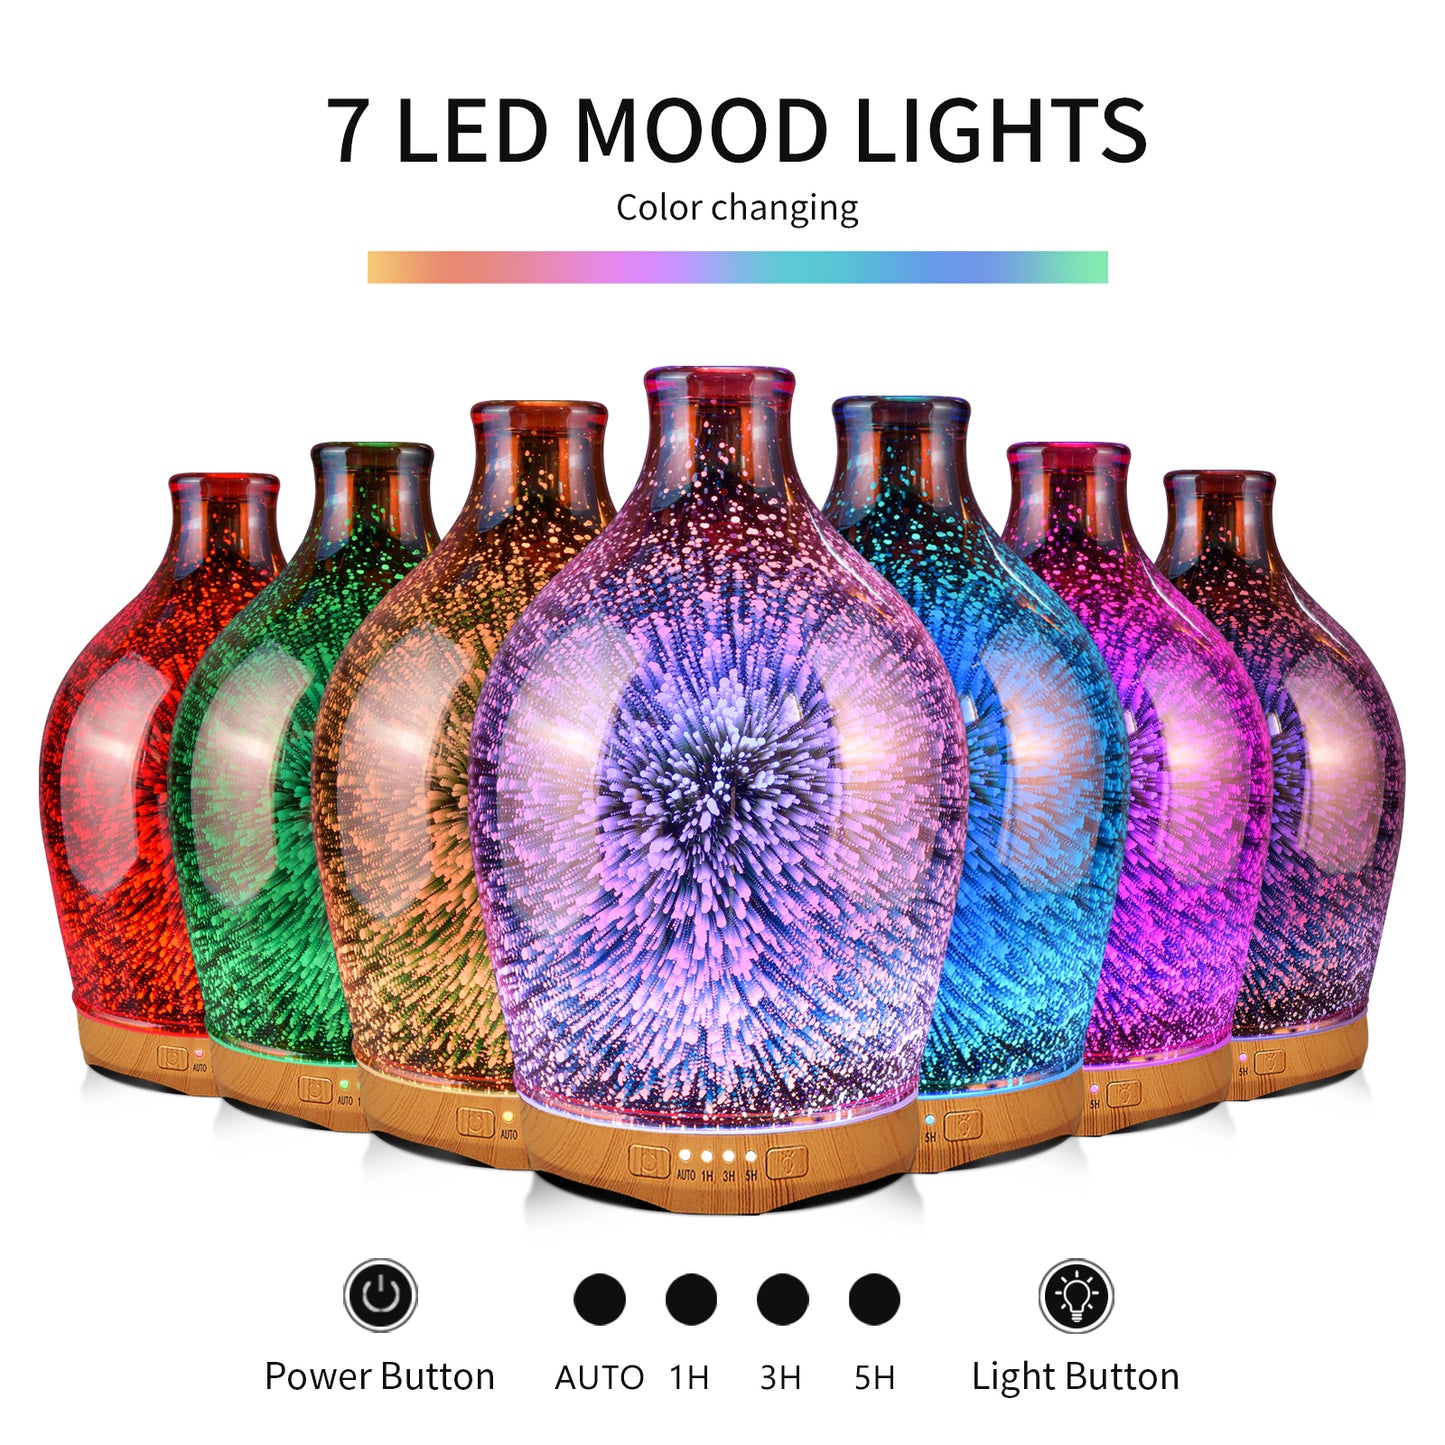 280ml Essential Oil Diffuser 3D Glass Aromatherapy Ultrasonic Humidifier - Auto Shut-Off,Timer Setting, BPA Free for Home Hotel Yoga Leisure SPA Gift